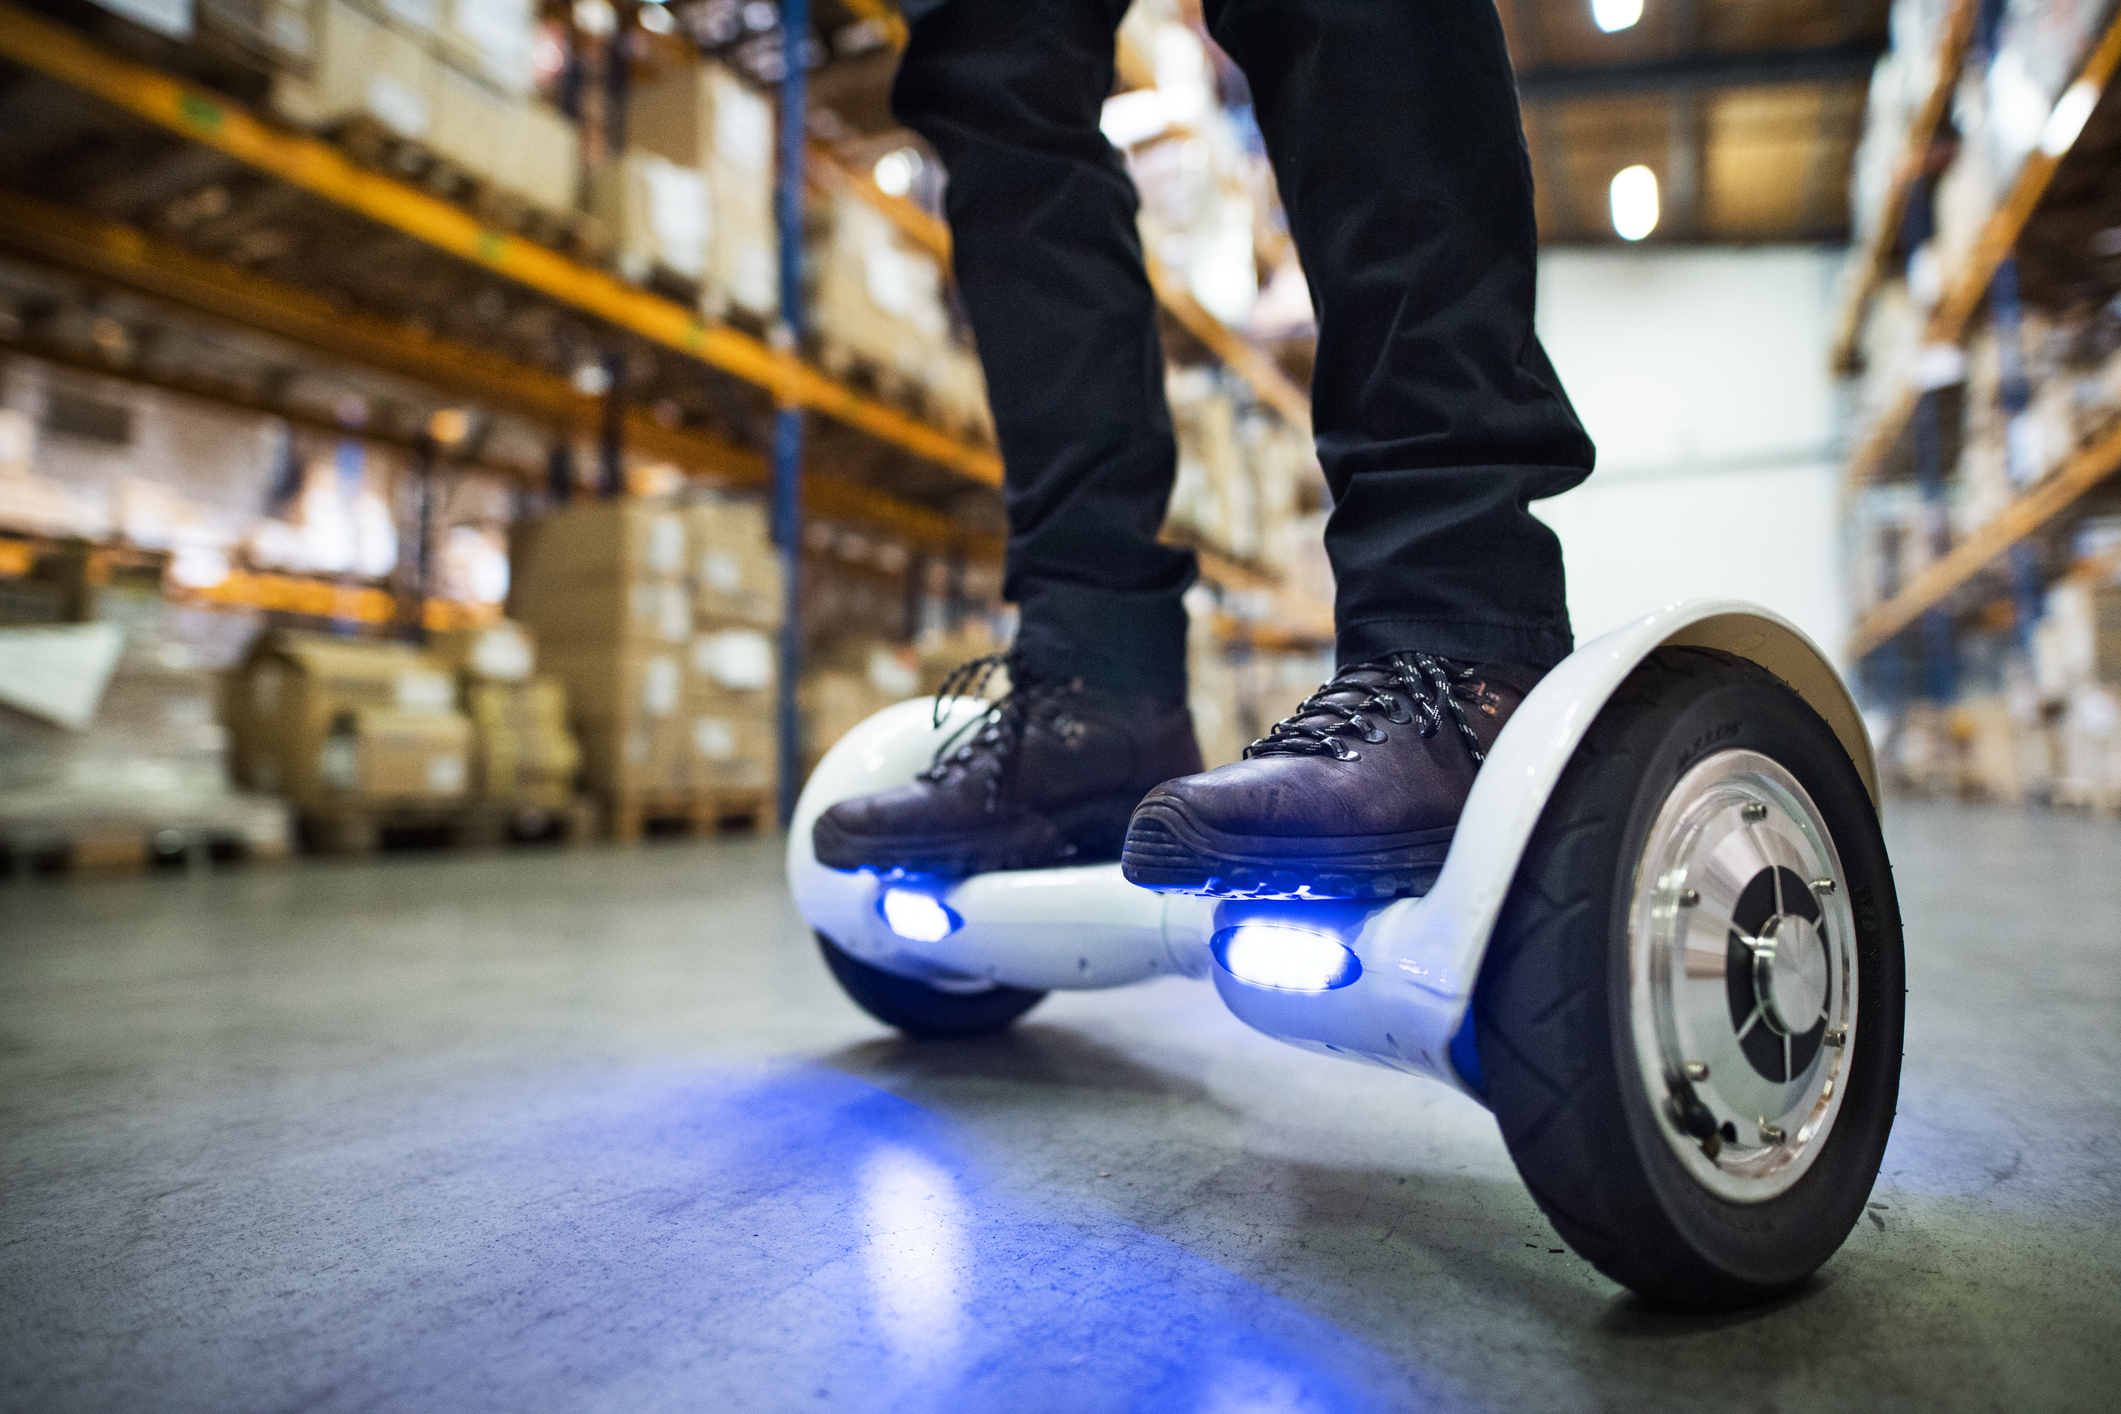 Person riding a hoverboard in a warehouse